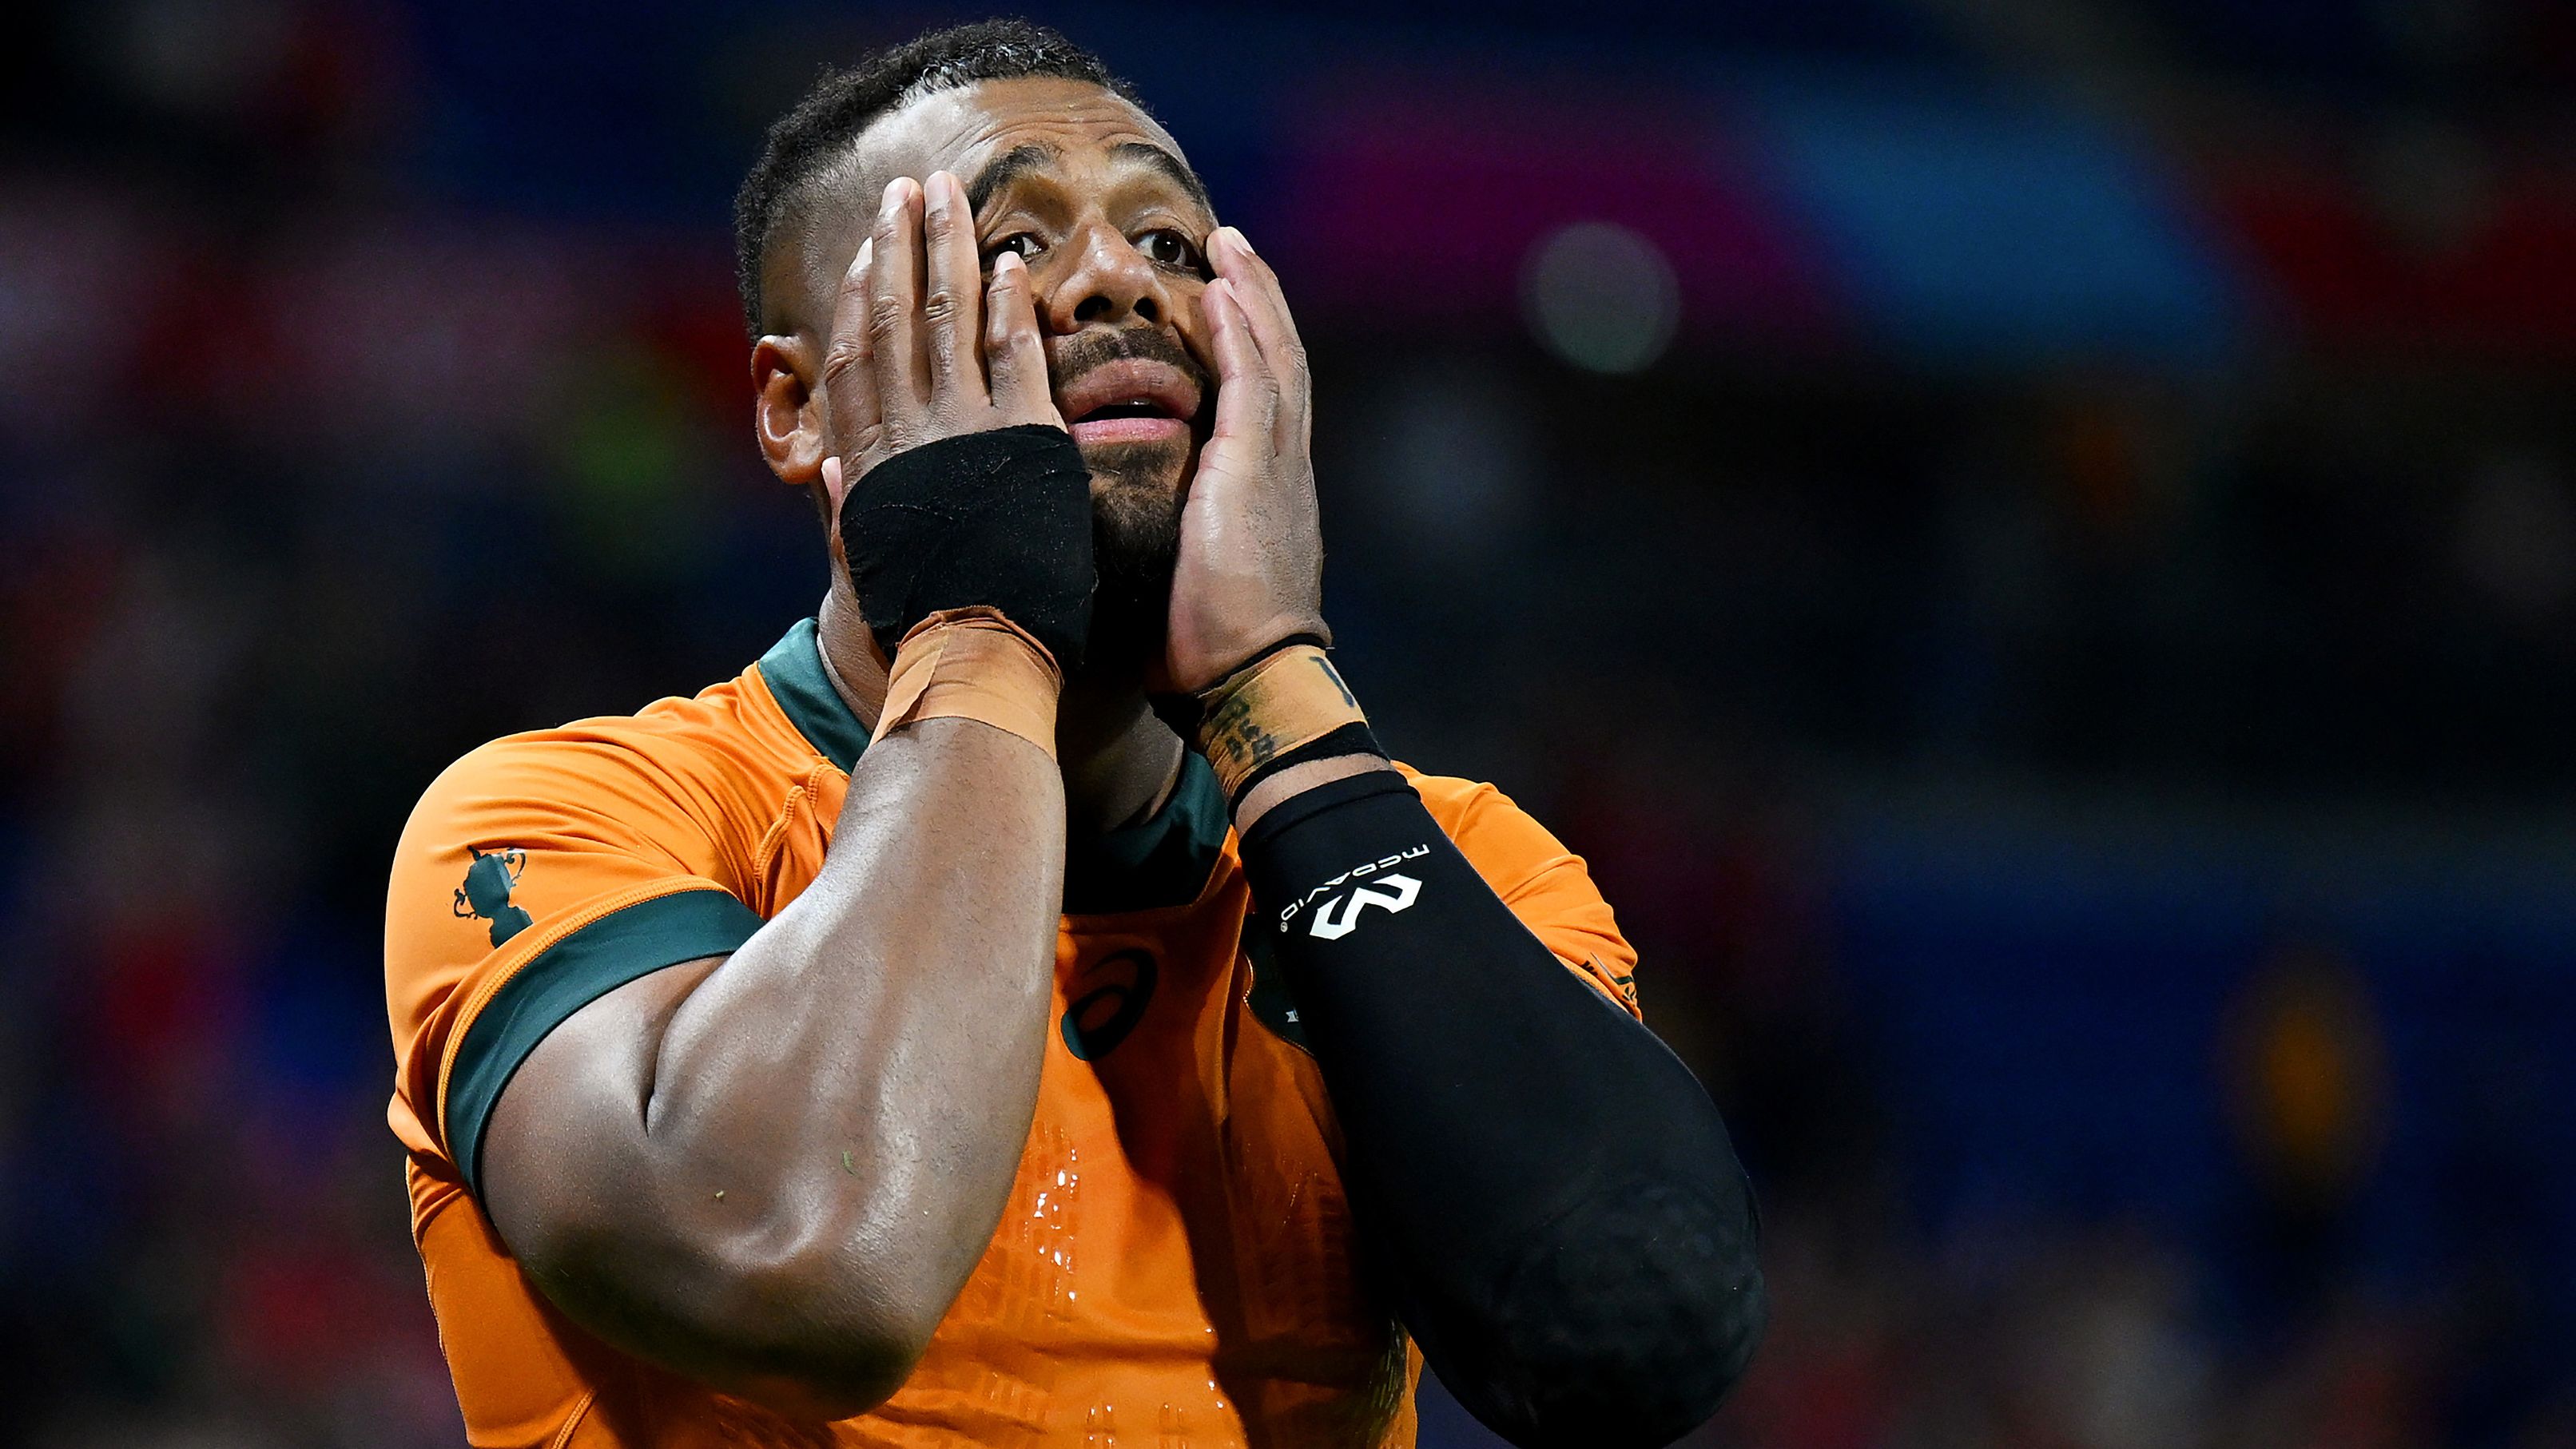 Samu Kerevi of Australia reacts after the record loss at the Rugby World Cup.